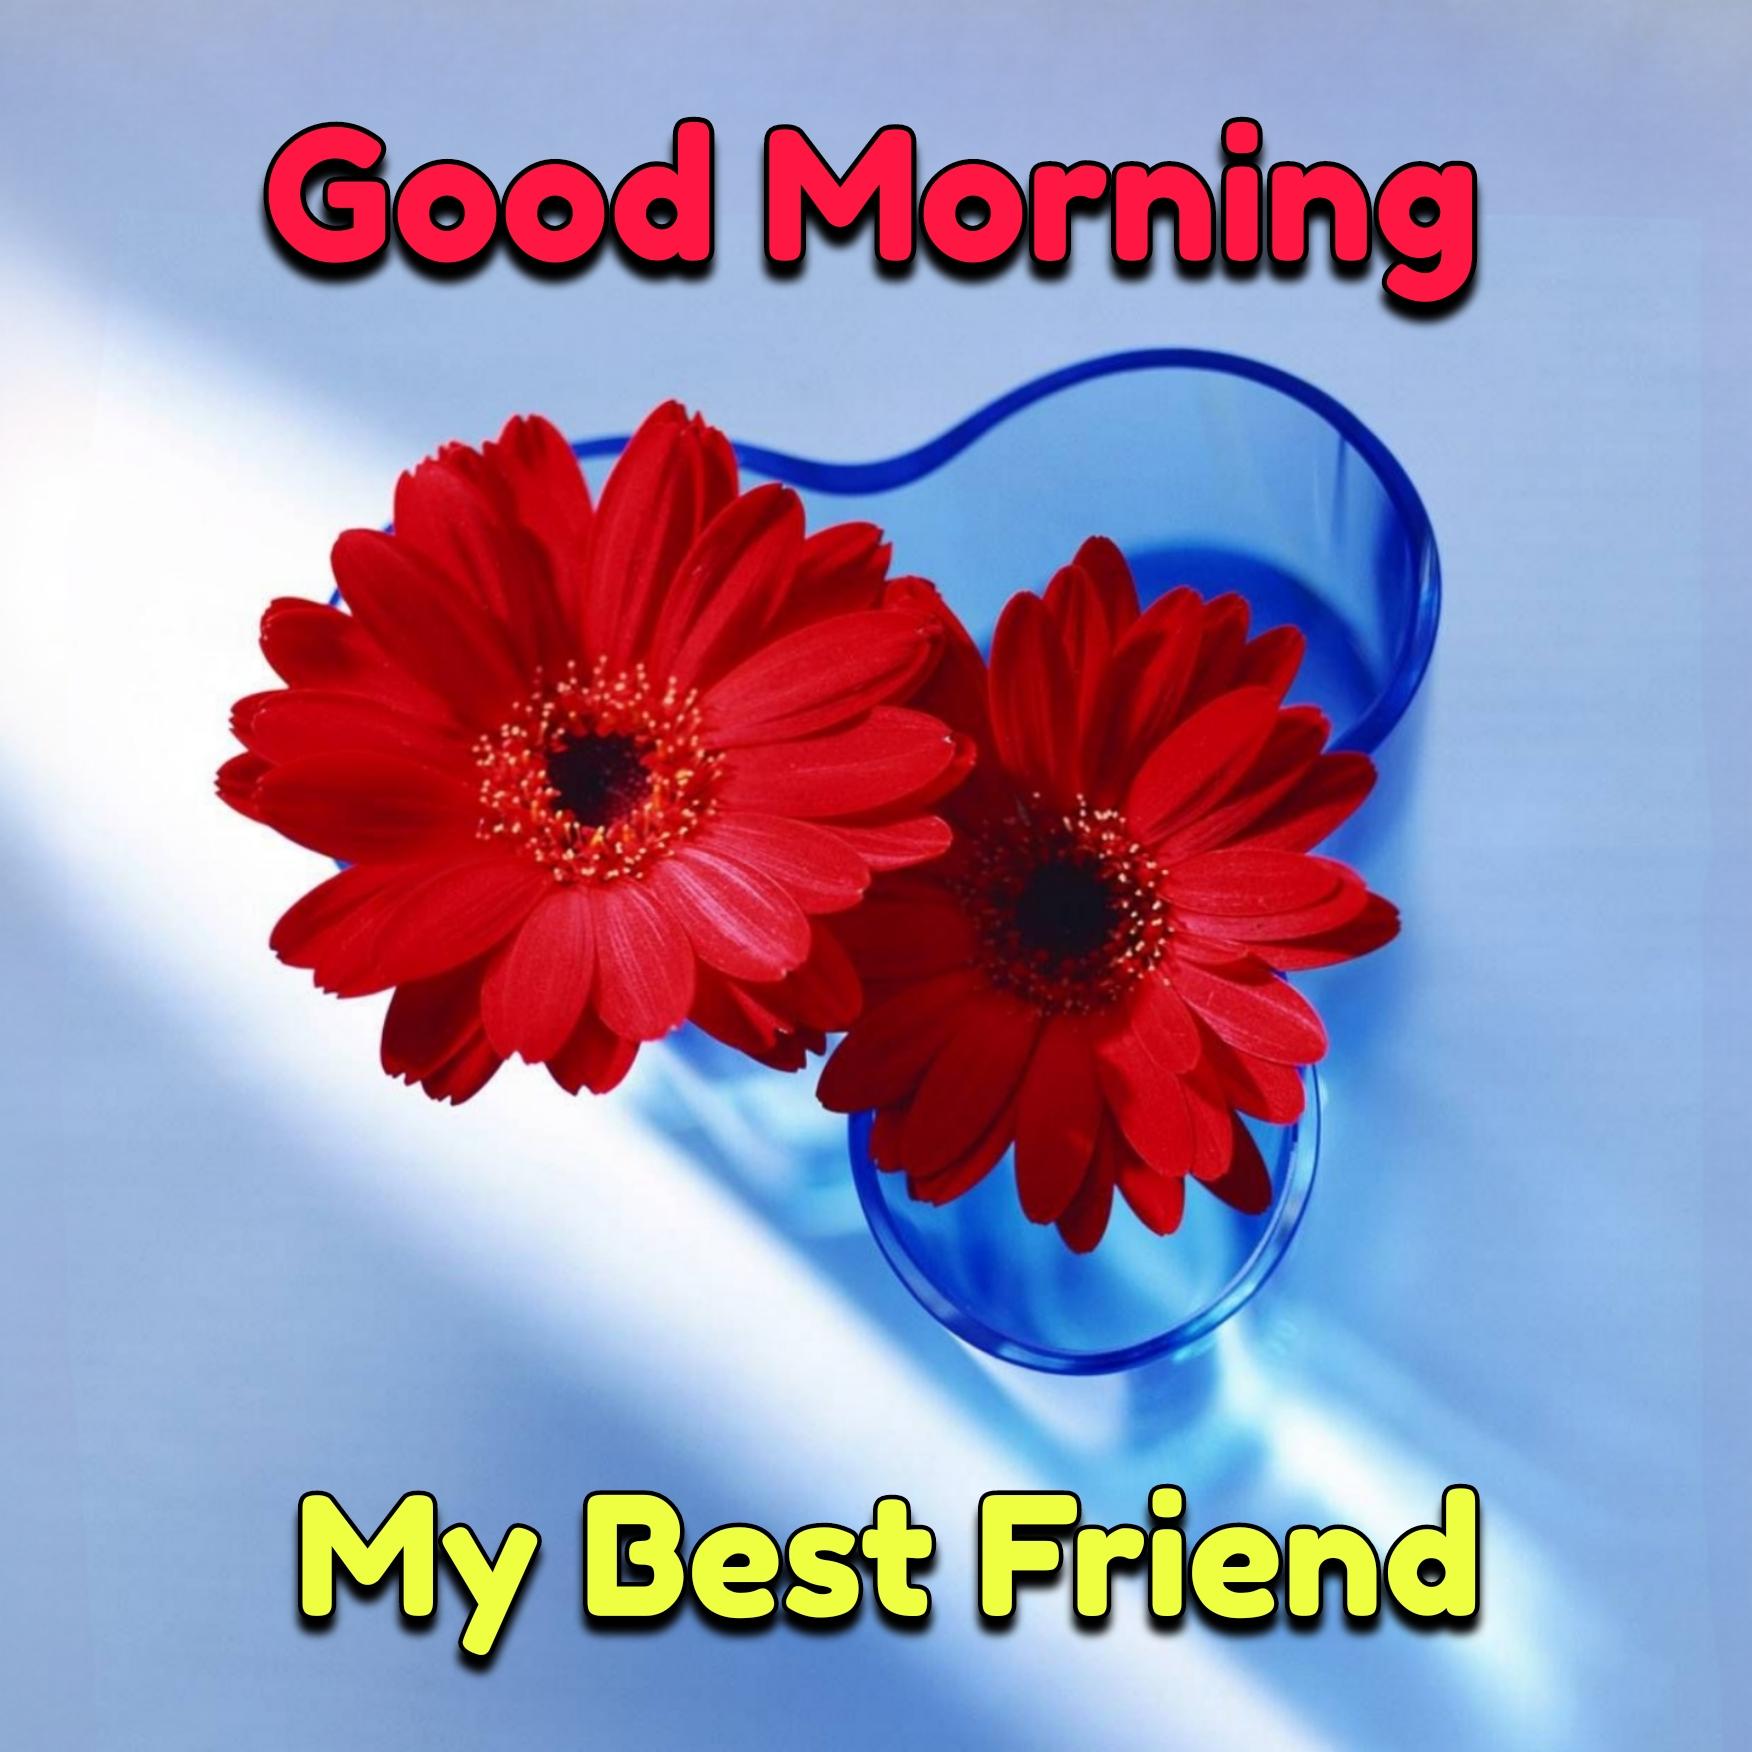 Good Morning My Best Friend Images